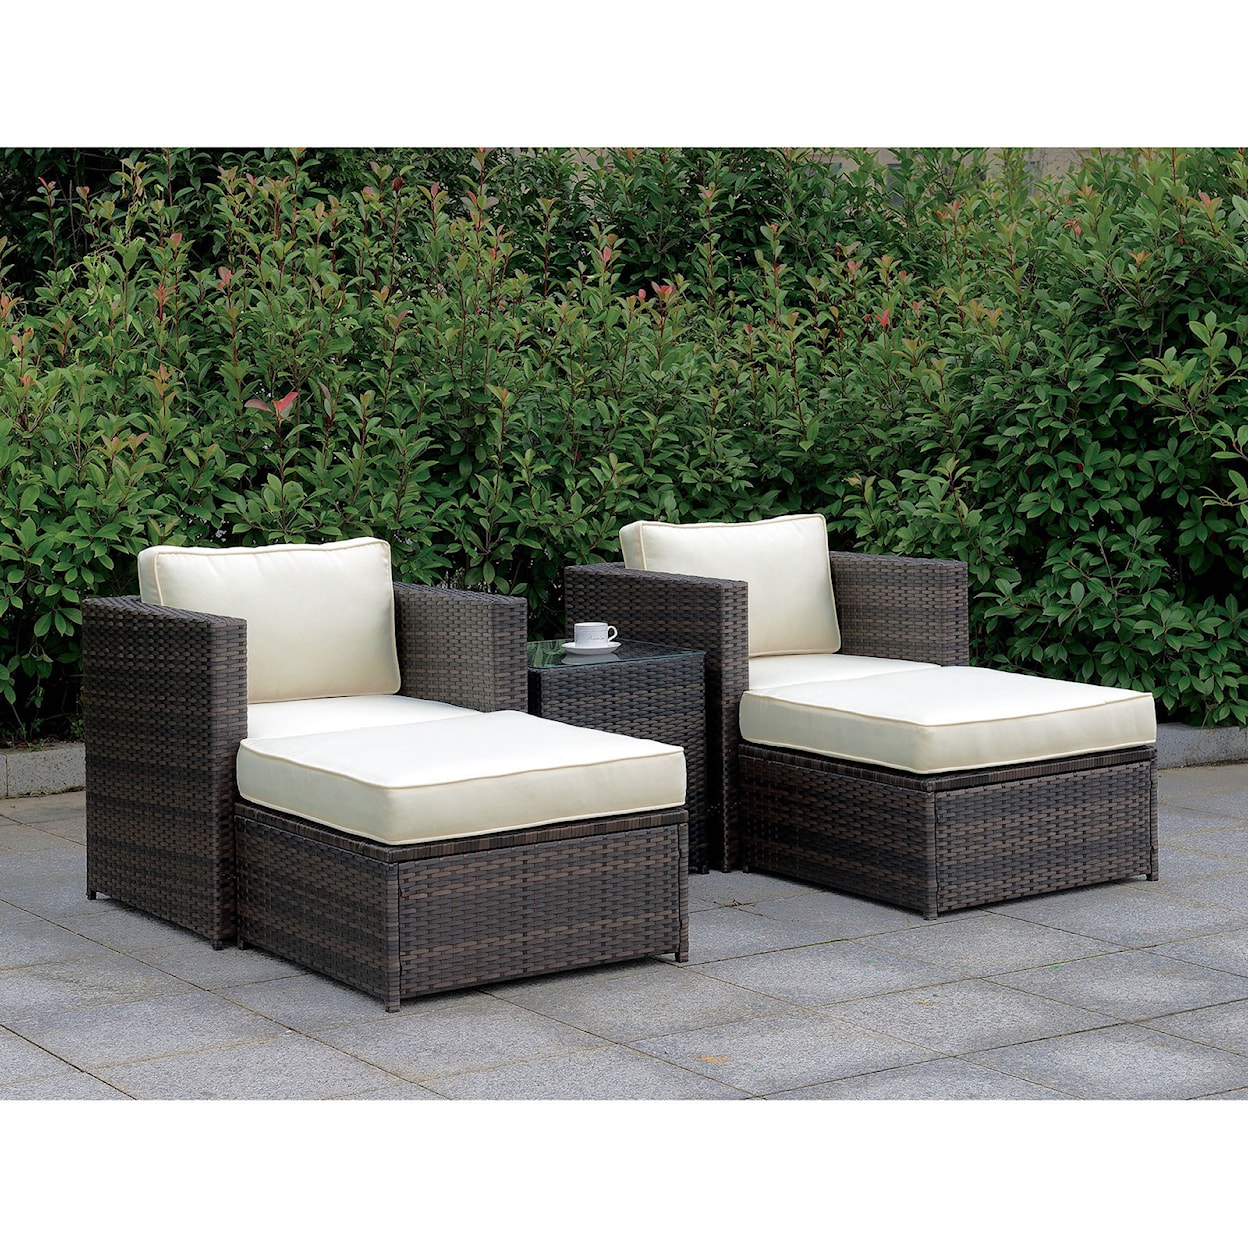 FUSA Ilona Outdoor Chair, Ottoman and End Table Set